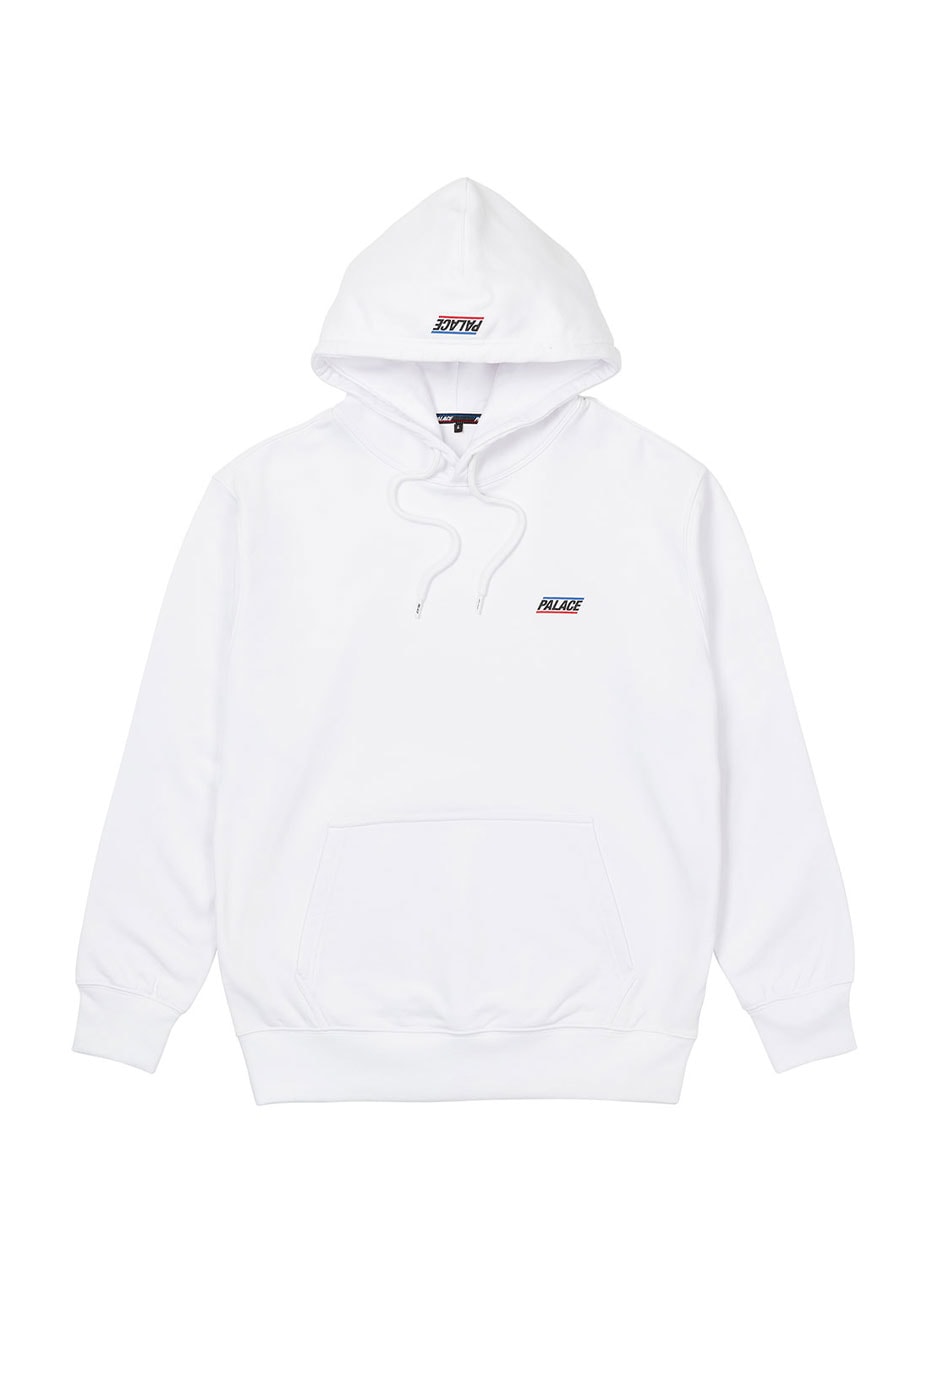 Palace Spring 2022 Drop 2 Release | Hypebeast